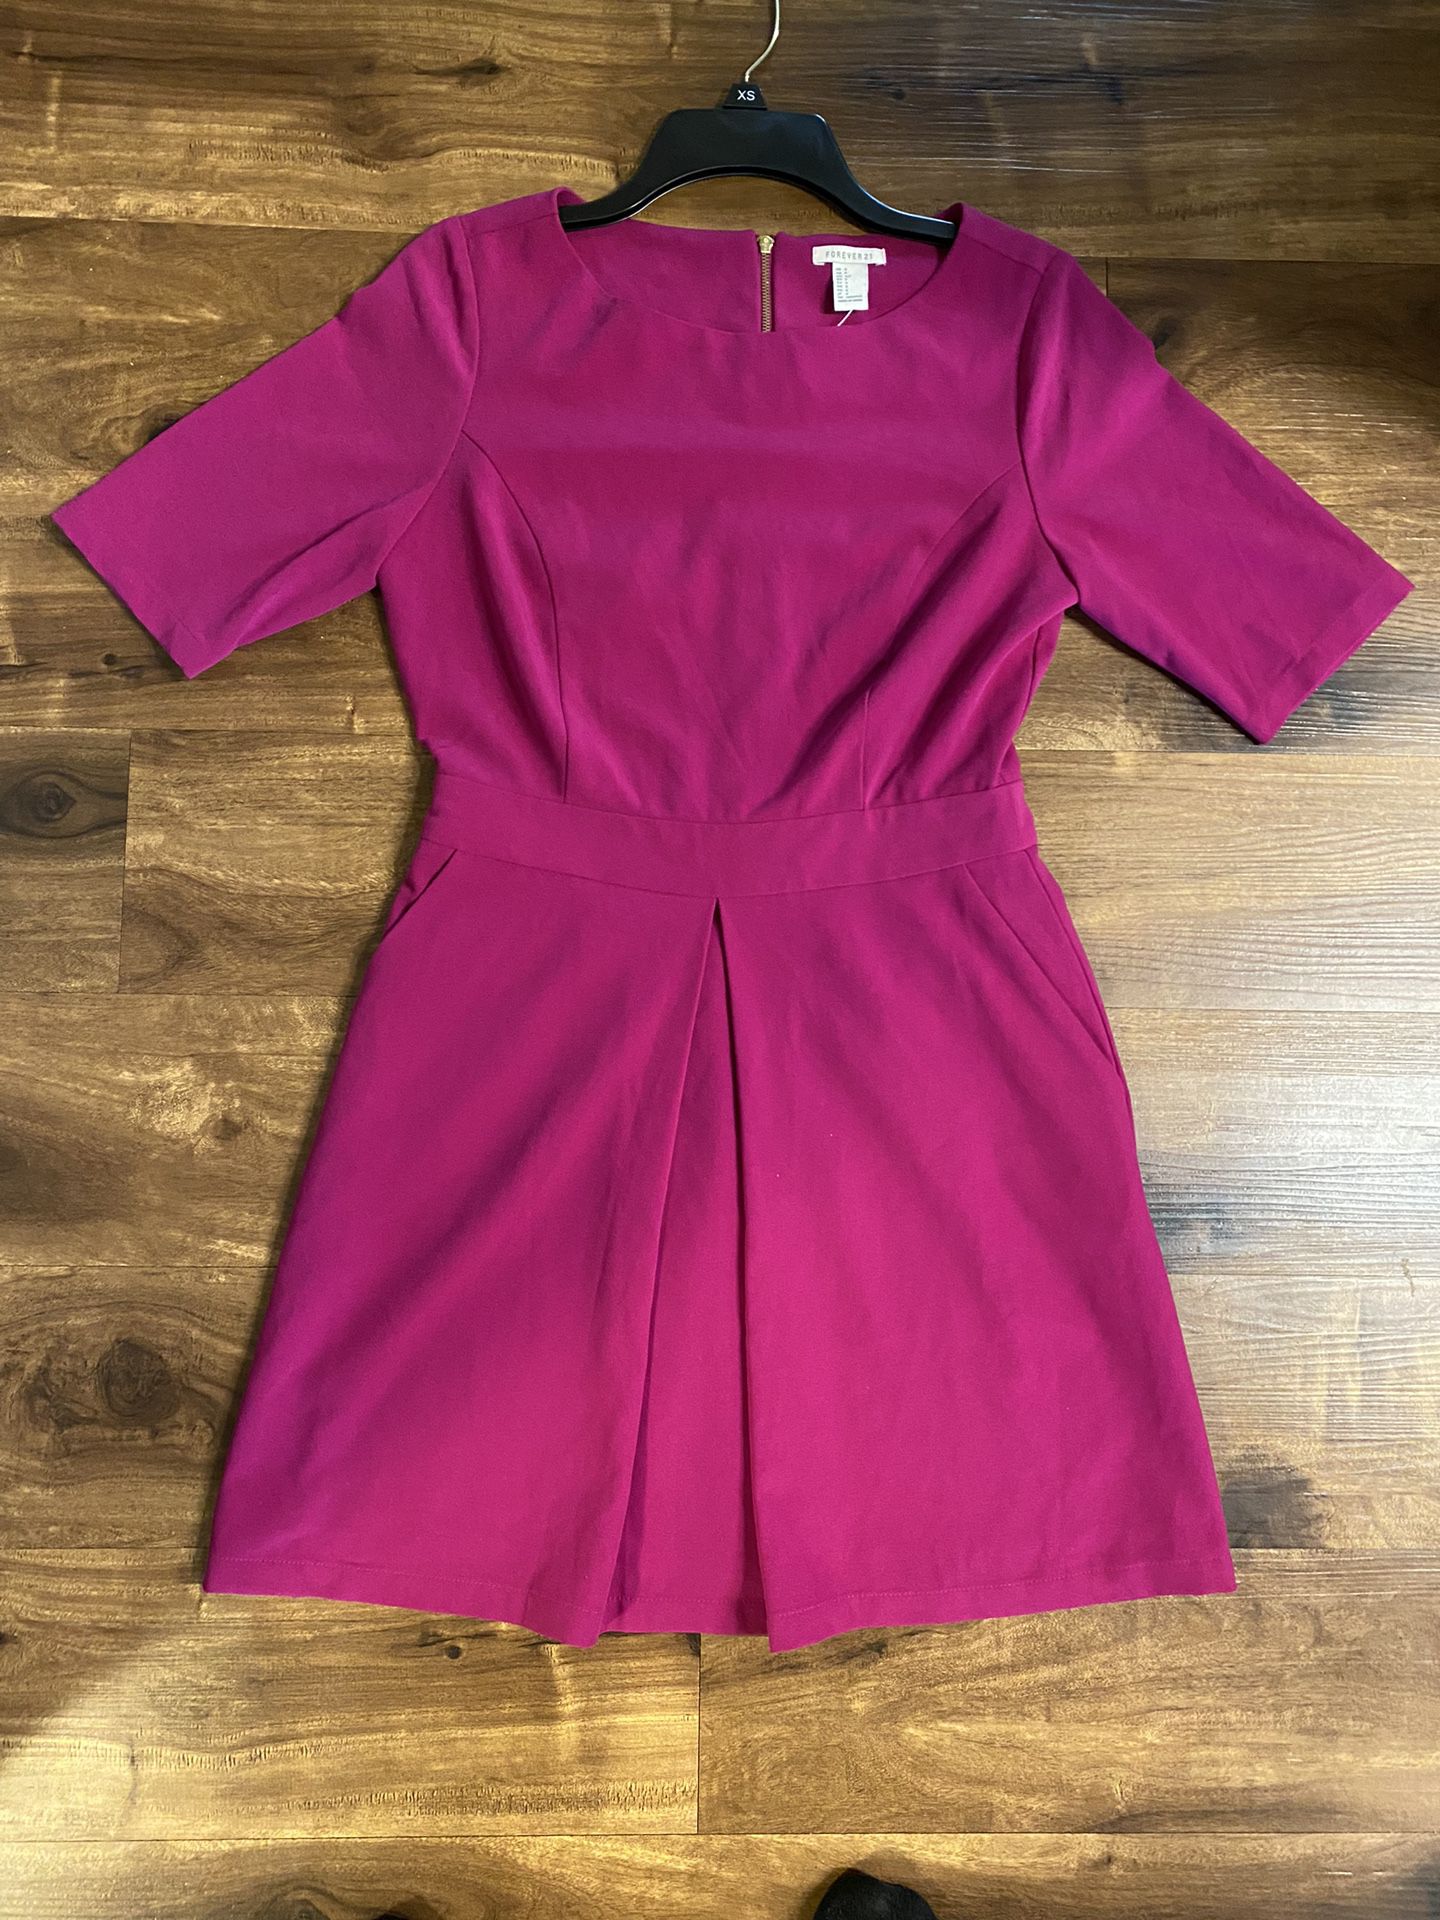 Brand New Woman’s Forever 21 brand Pink Dress Up For Sale 